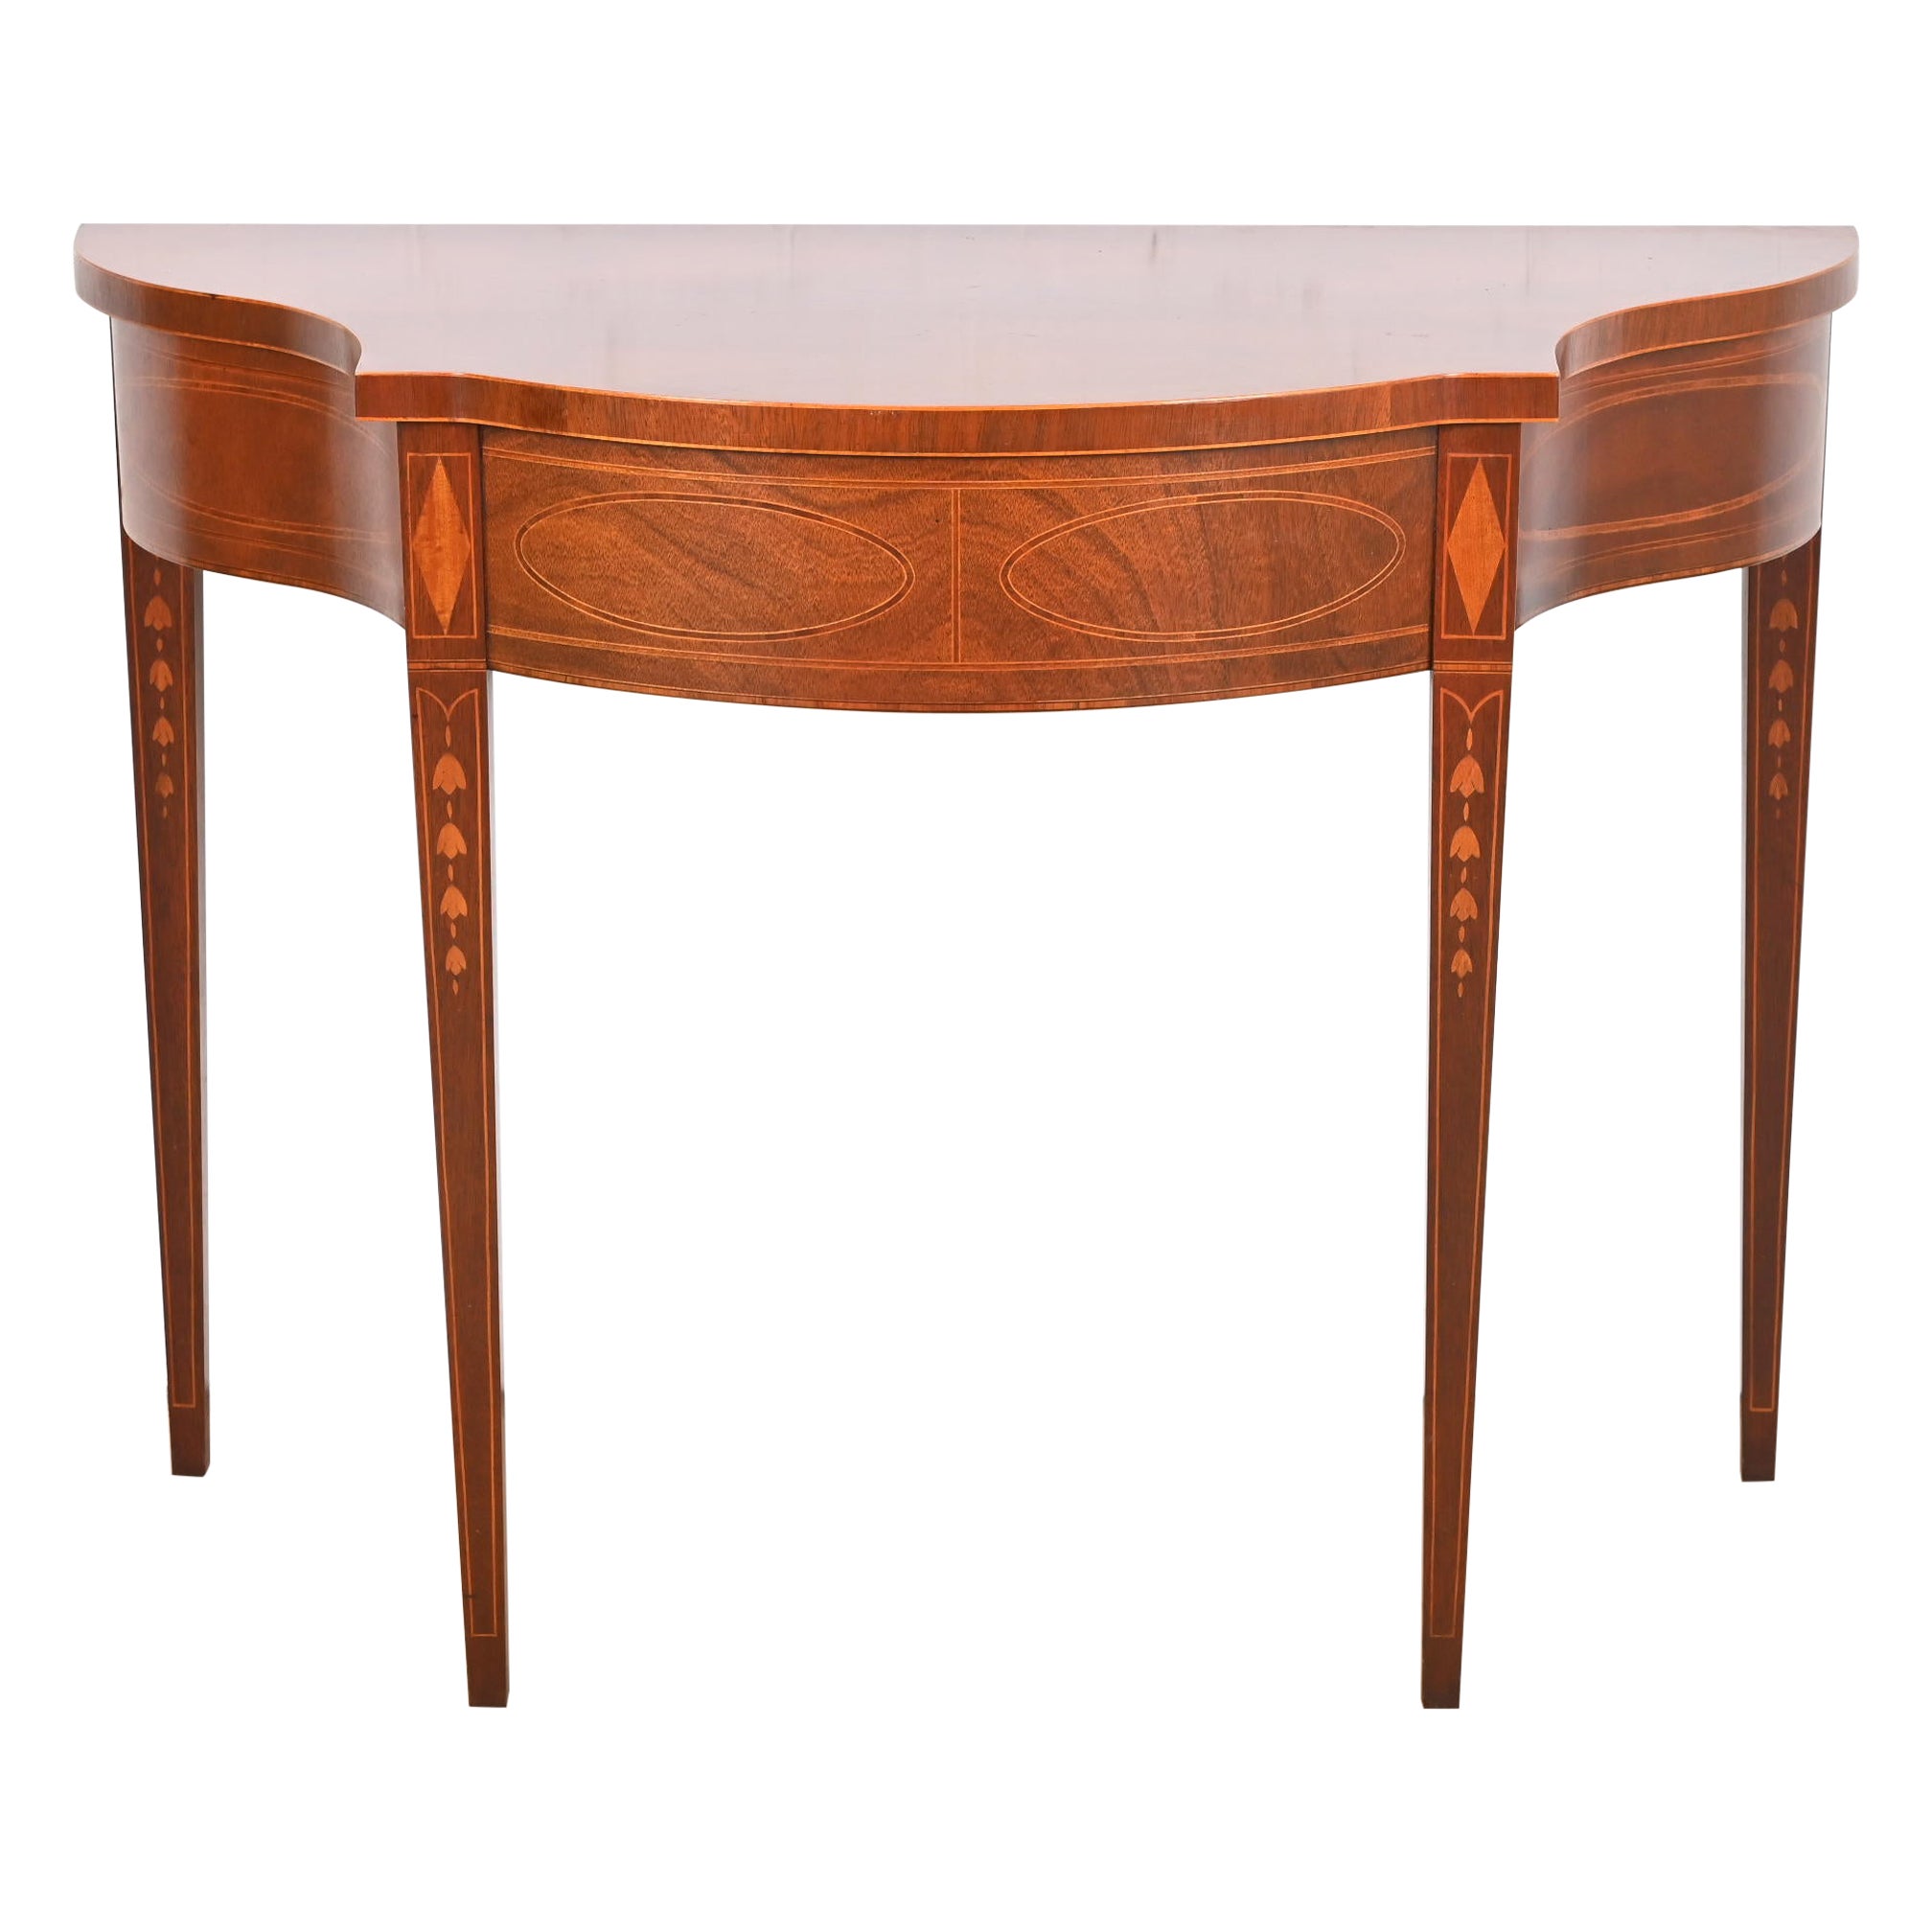 Baker Furniture Historic Charleston Federal Inlaid Mahogany Console Table For Sale